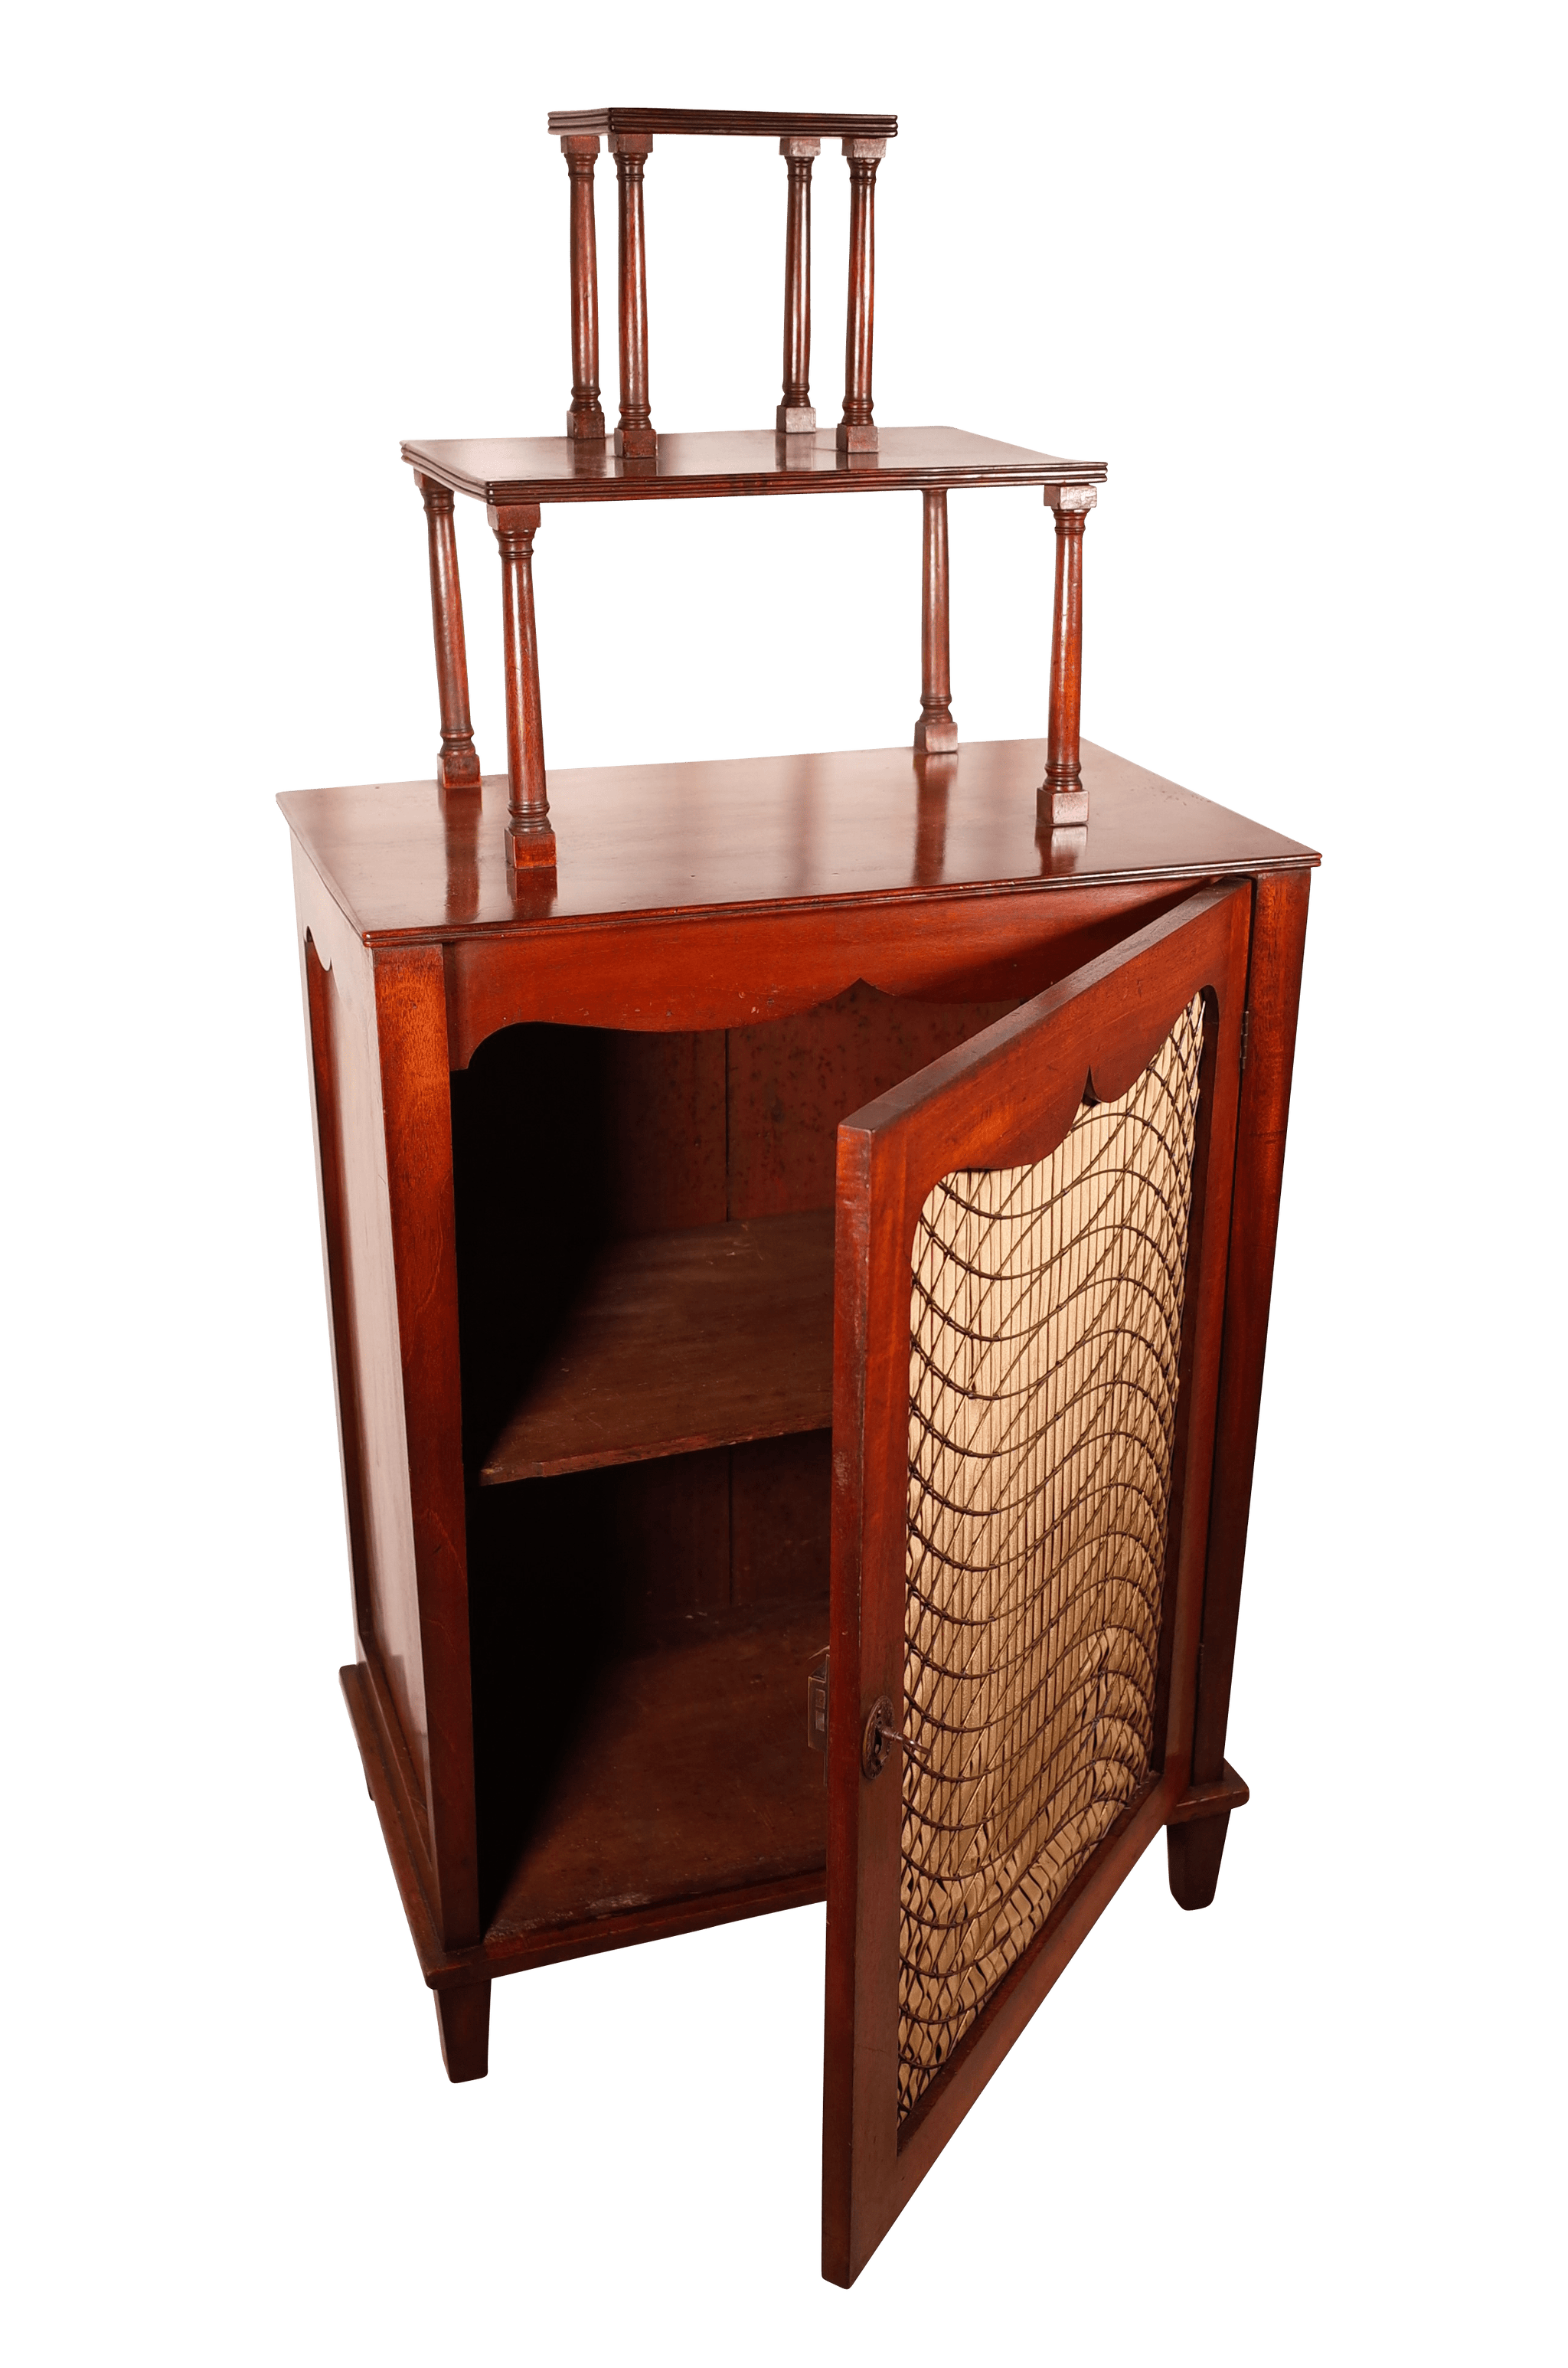 Regency Mahogany Side Cabinet with Brass Grilled Door and Tiered Shelf